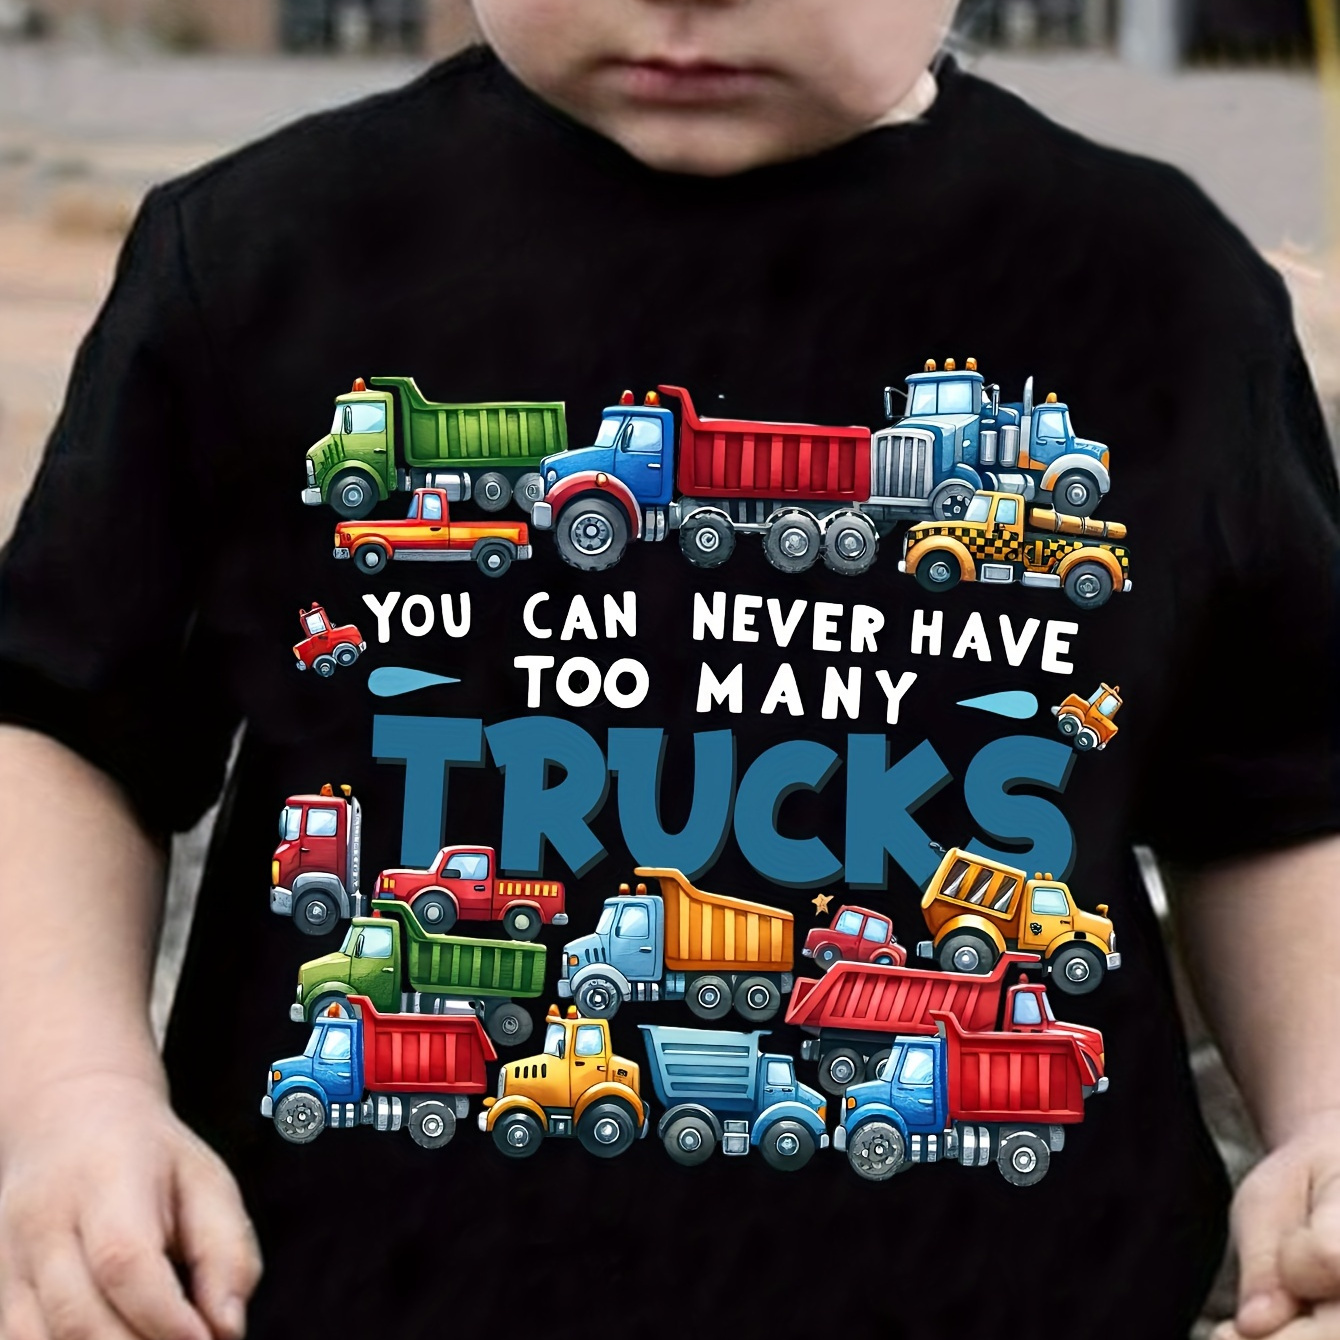 

Truck Print Boys Crew Neck Comfy Simple Style T-shirts Casual Sporty Short Sleeves Perfect Top As Gifts For Spring Summer Outdoor Activity